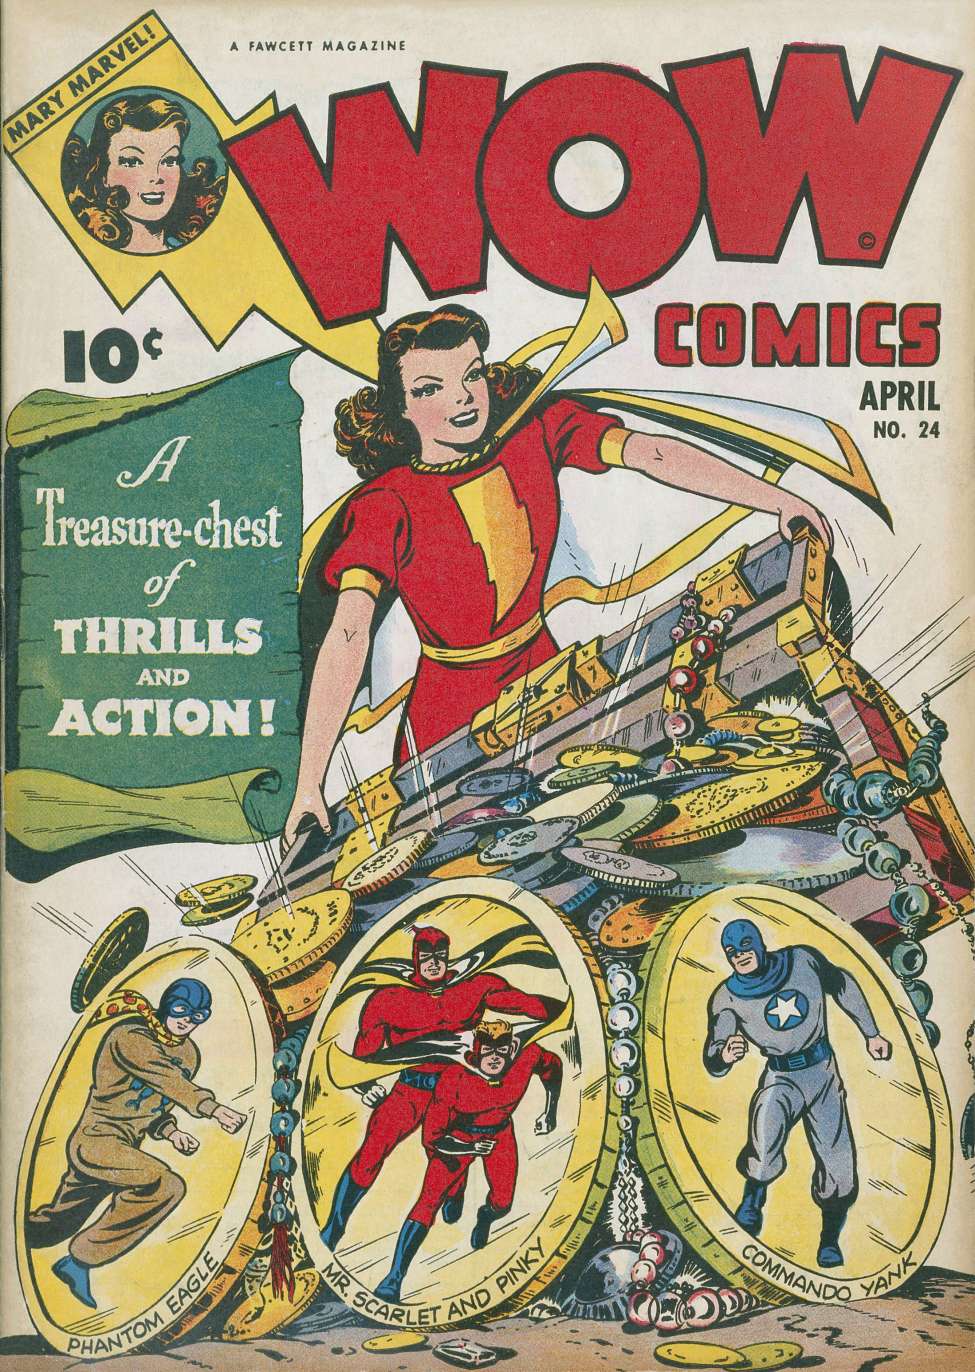 Book Cover For Wow Comics 24 - Version 2